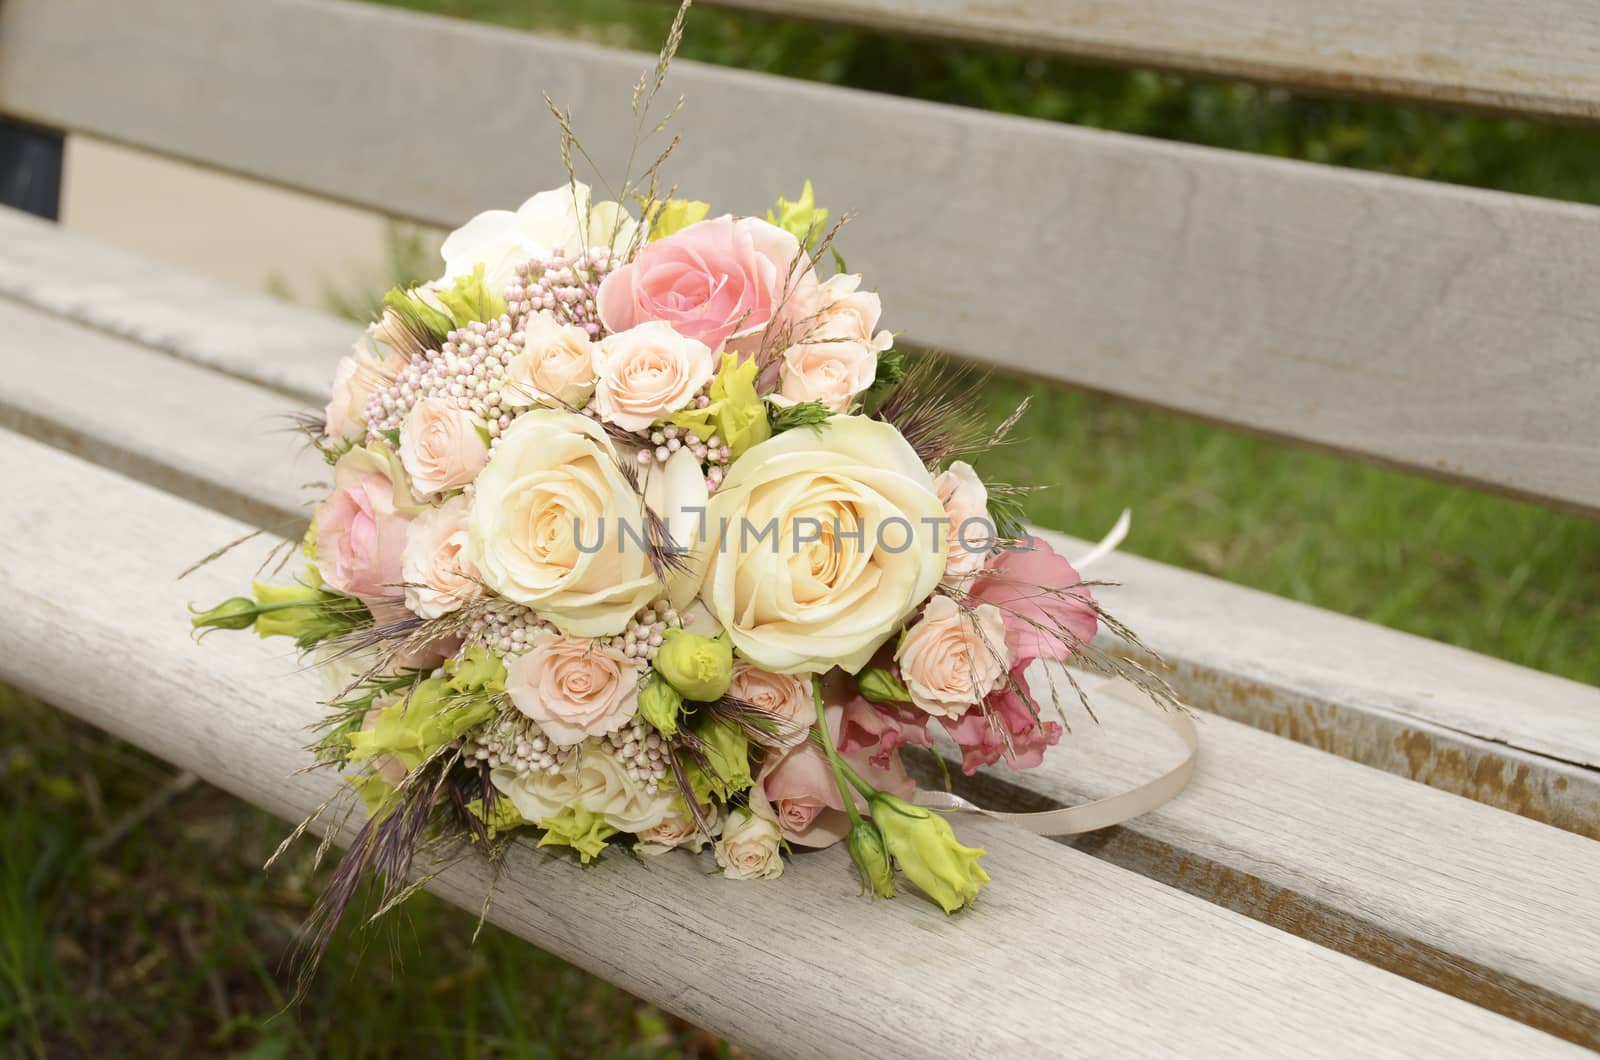 bouquet of wedding flowers lying on a wooden bench